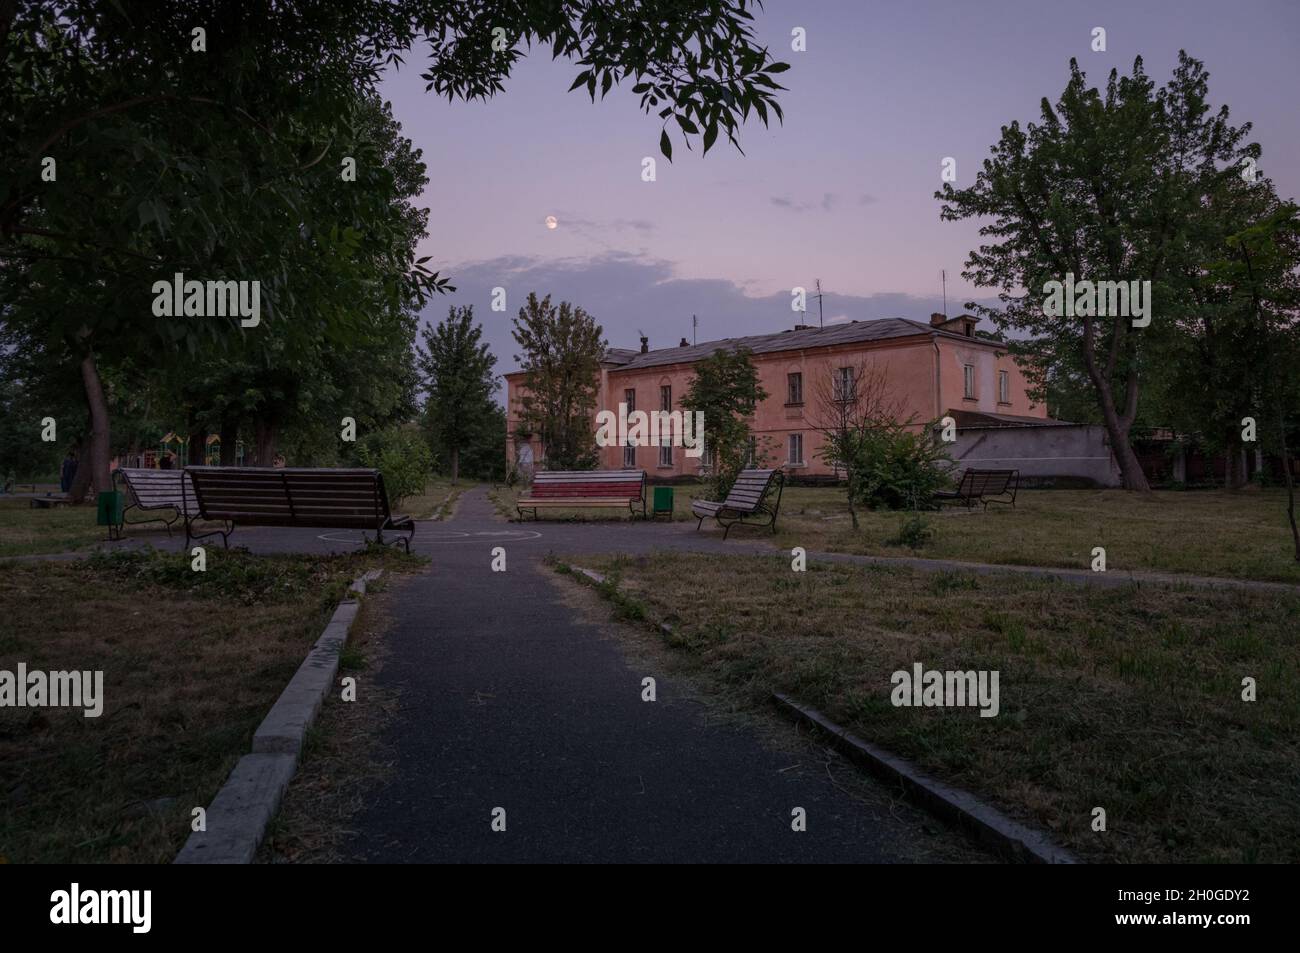 Small town old park plunging in dusk. Outdoor city place for walking with decayed old benches and moon above clouds in dark sky. Stock Photo